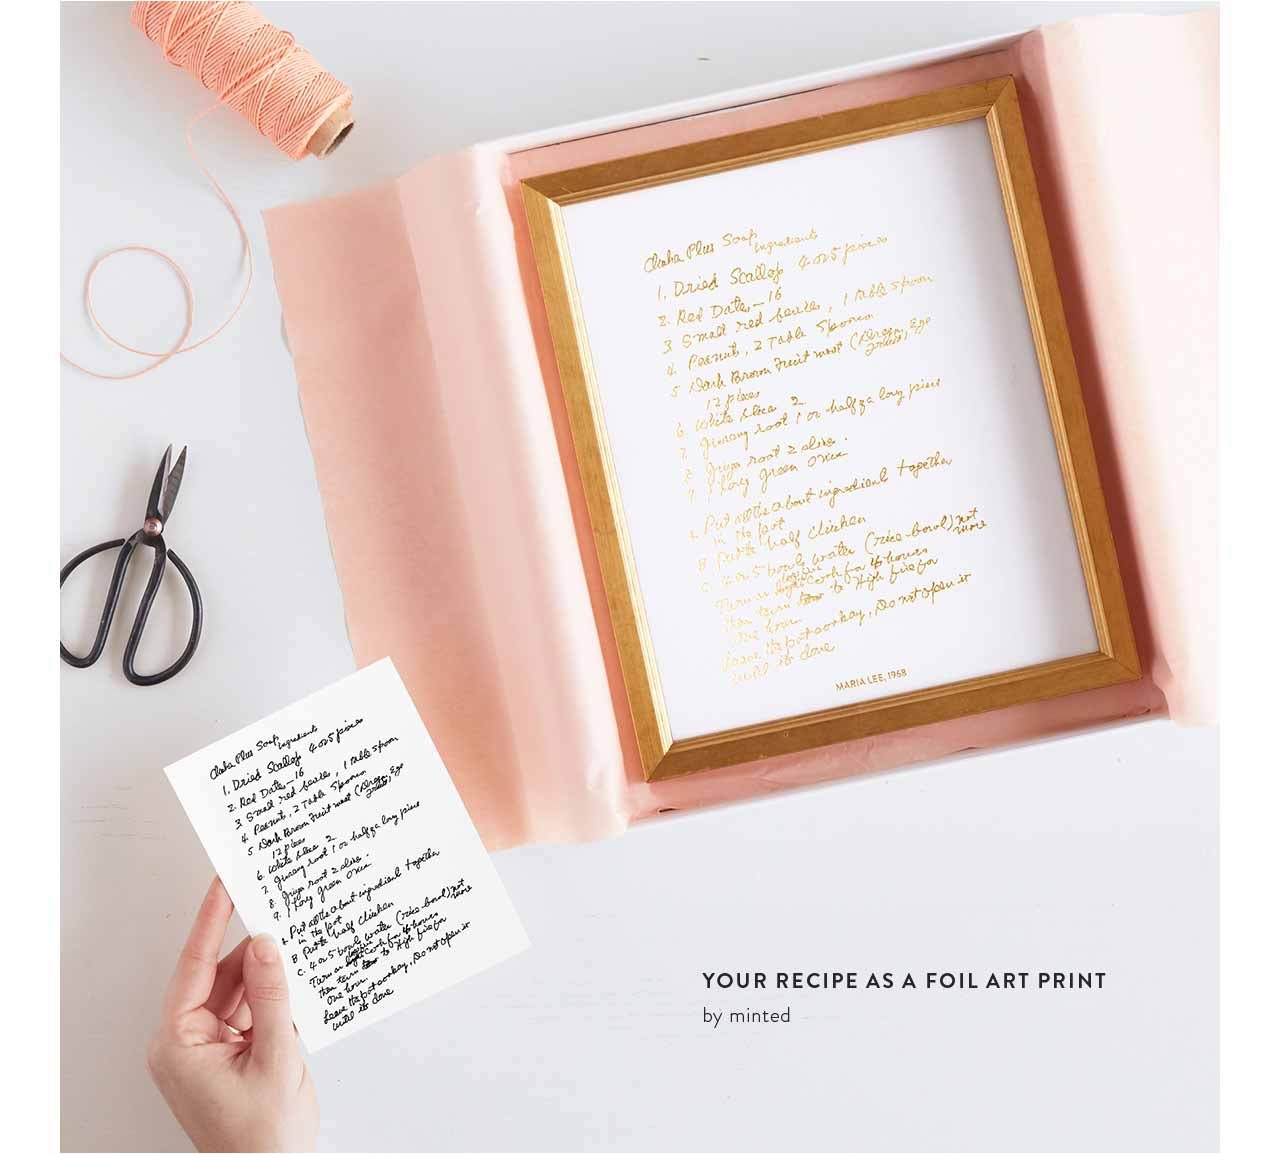  Your Recipe as a Foil Art Print by Minted